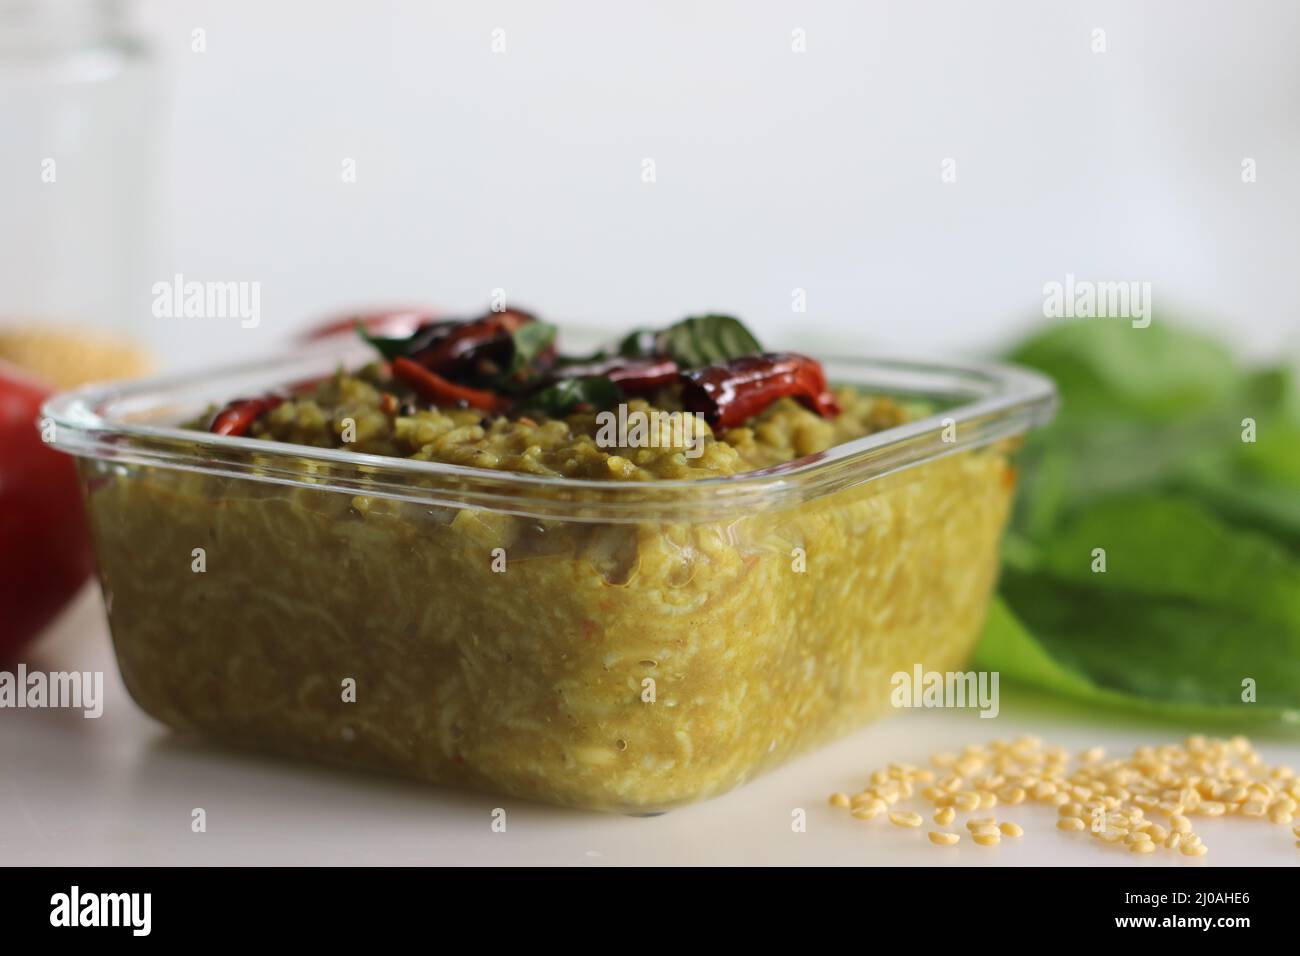 One pot preparation made of basmati rice, yellow mung lentils, blanched and pureed spinach and spices. Commonly known as palak khichdi. Shot on white Stock Photo